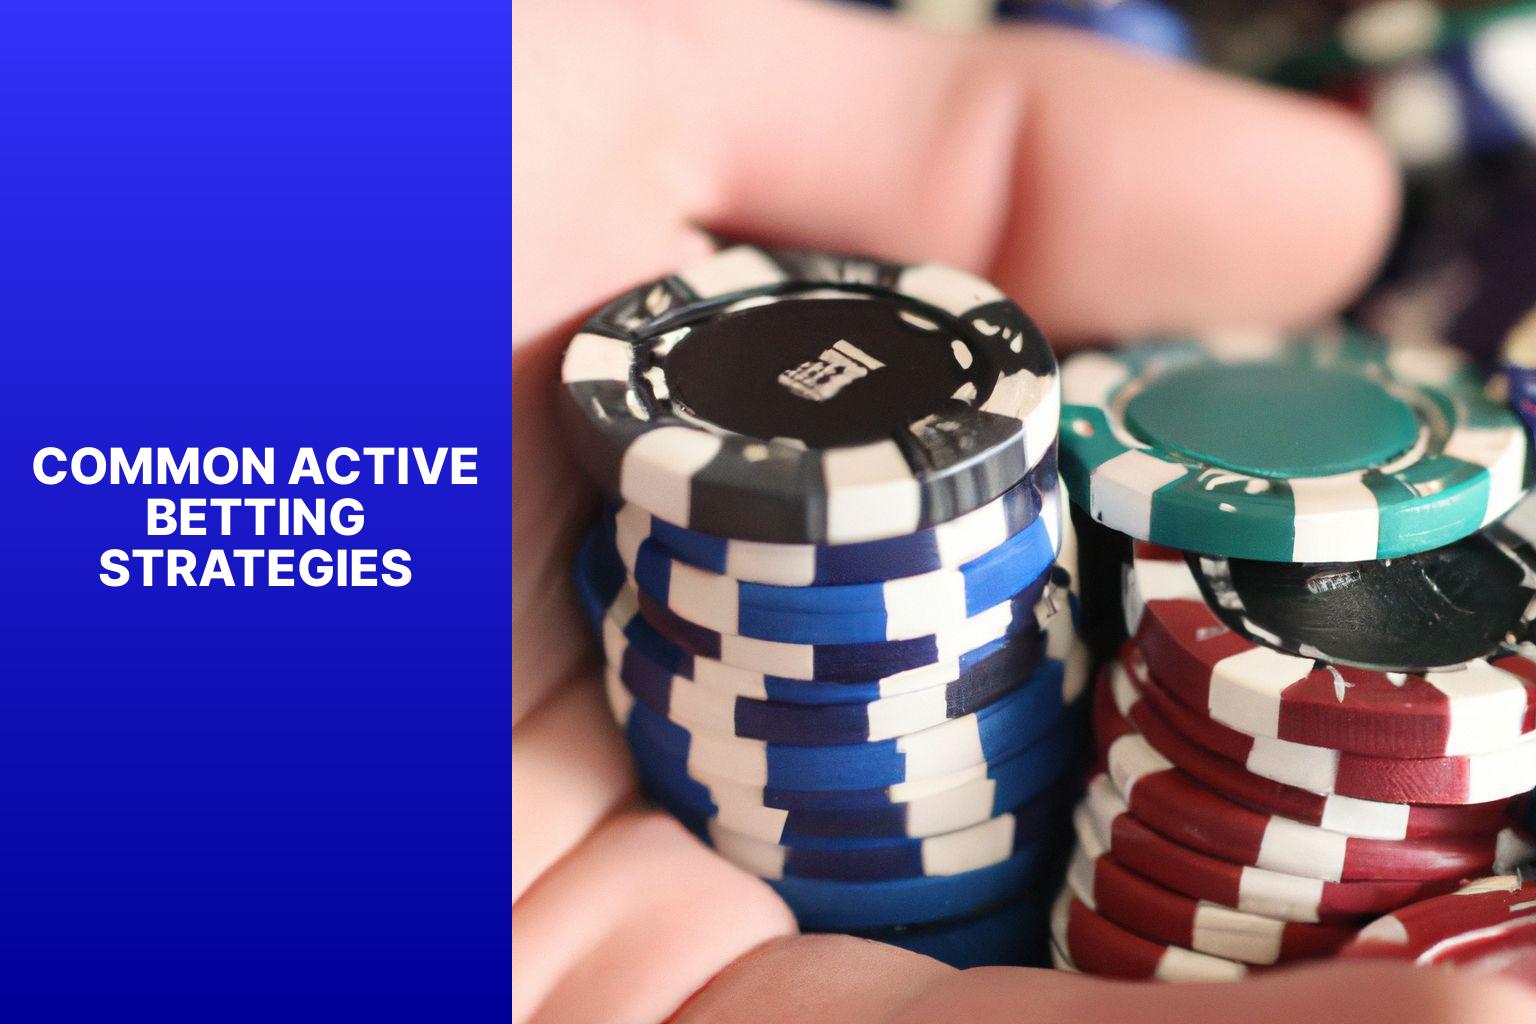 Common Active Betting Strategies - Active Betting Strategies: Staying Engaged in Betting 